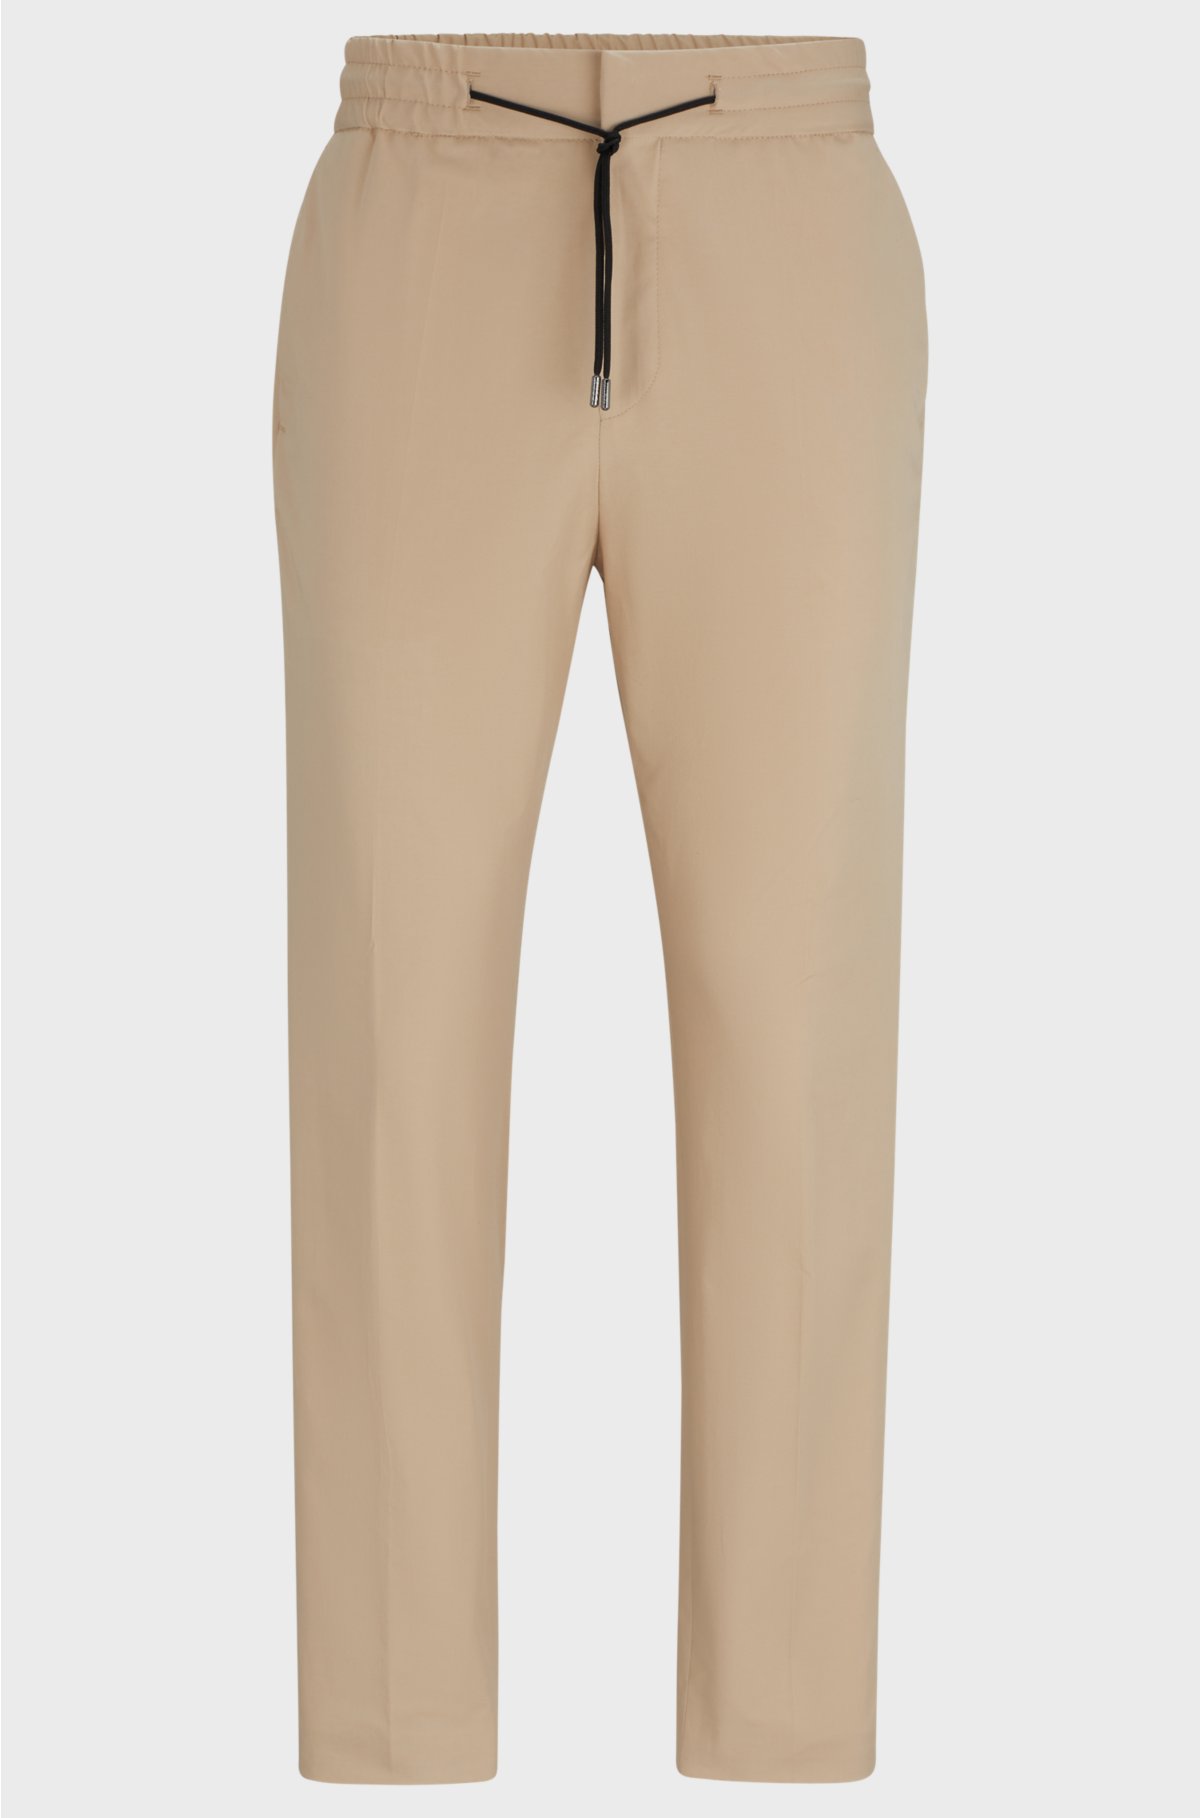 Performance-stretch cotton trousers with drawcord waist, Beige